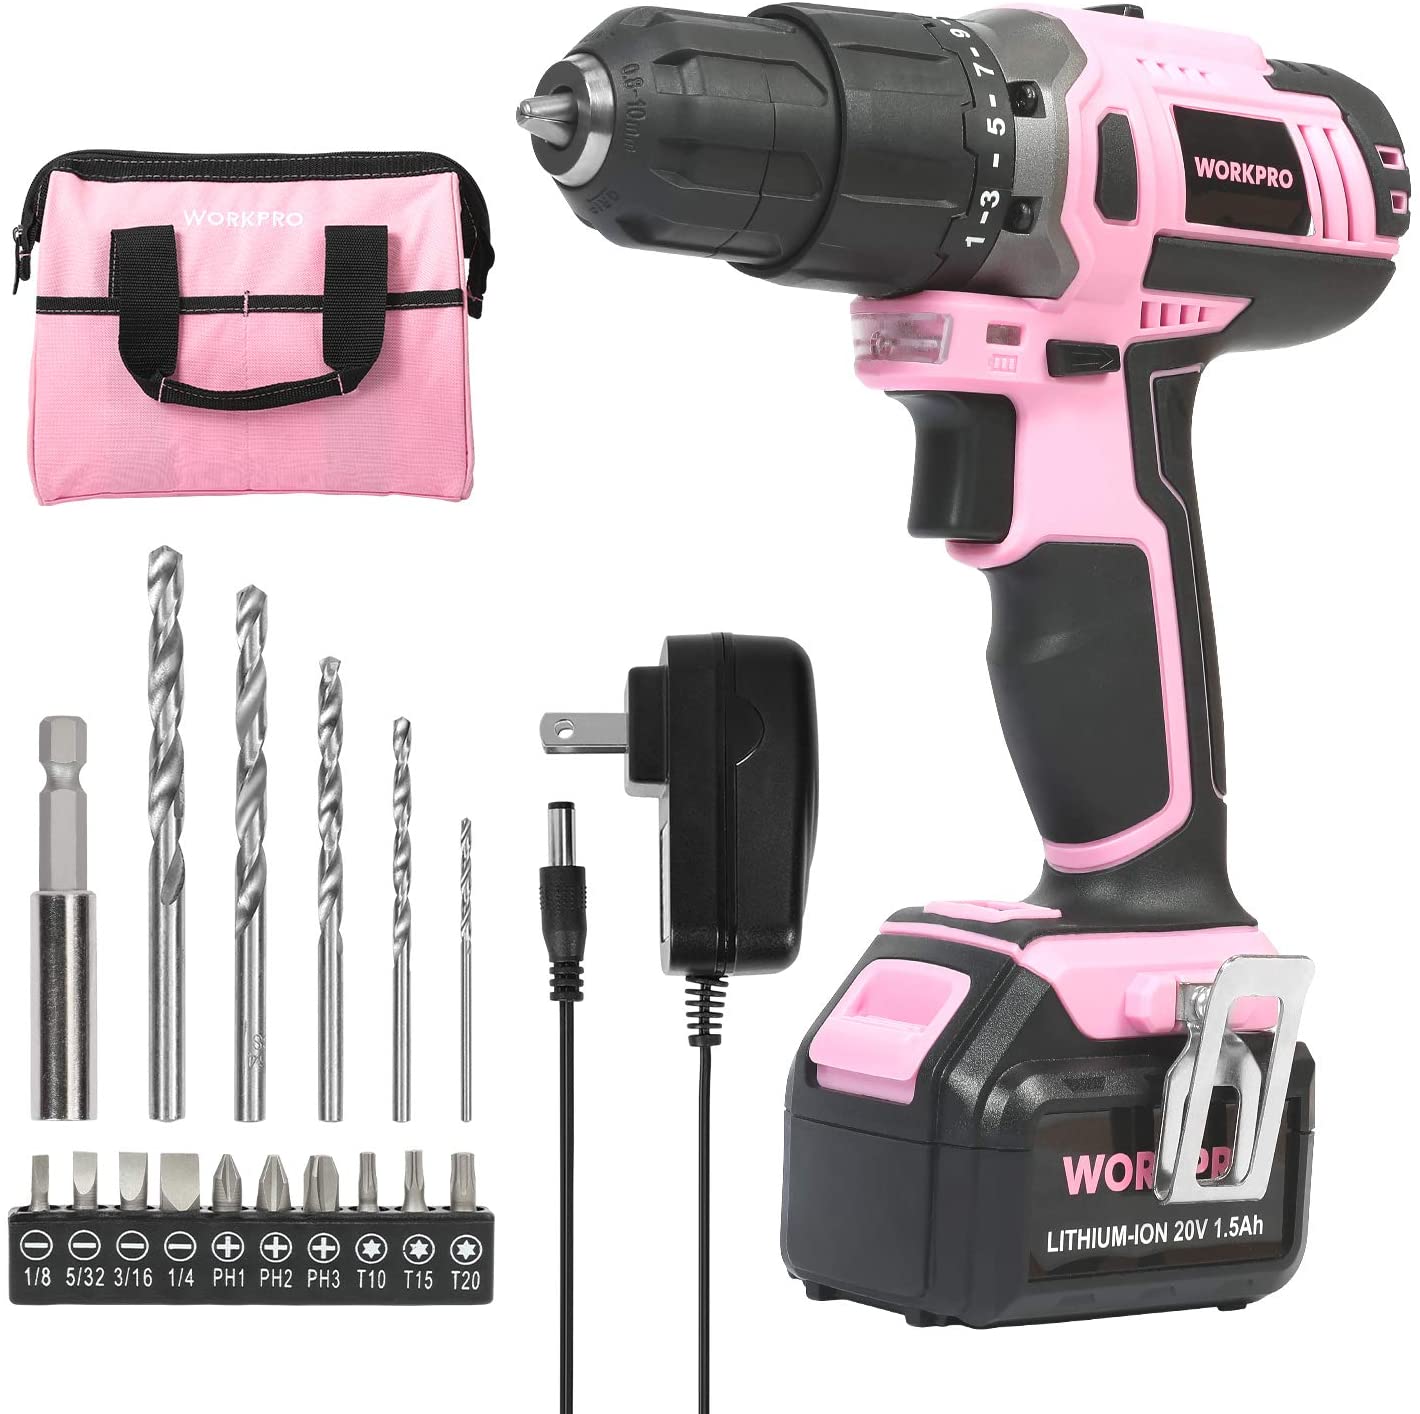 WorkPro Home Tool Set with Power Drill, 157pcs Power Drill Sets with 20V Cordless Lithium-Ion Drill Driver, Home Tool Kit for All Purpose, Cordless